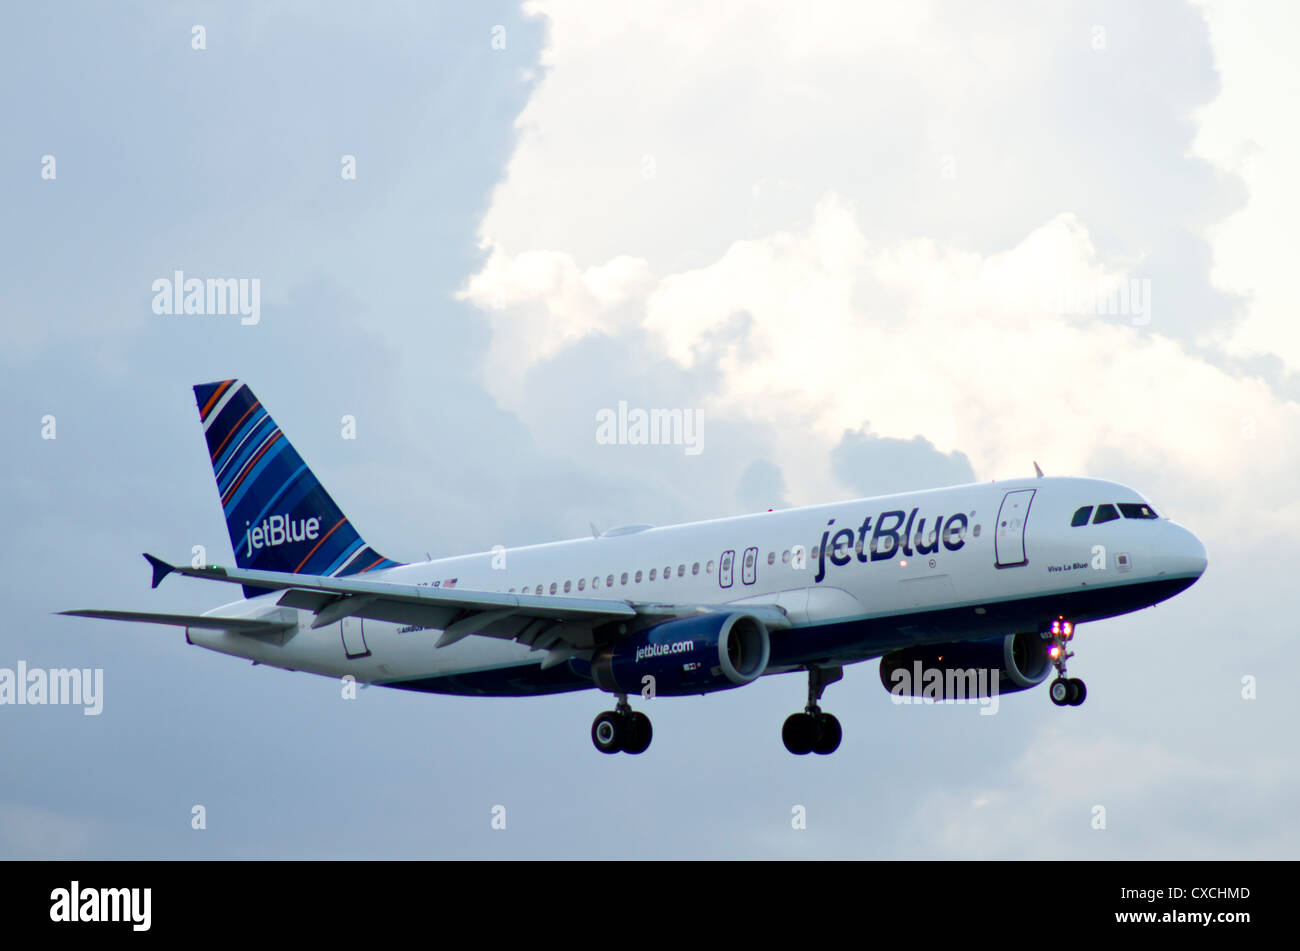 JetBlue Airlines Airbus preparing for landing at Fort Lauderdale International Airport, Florida on Labor Day -September 3, 2012. Stock Photo